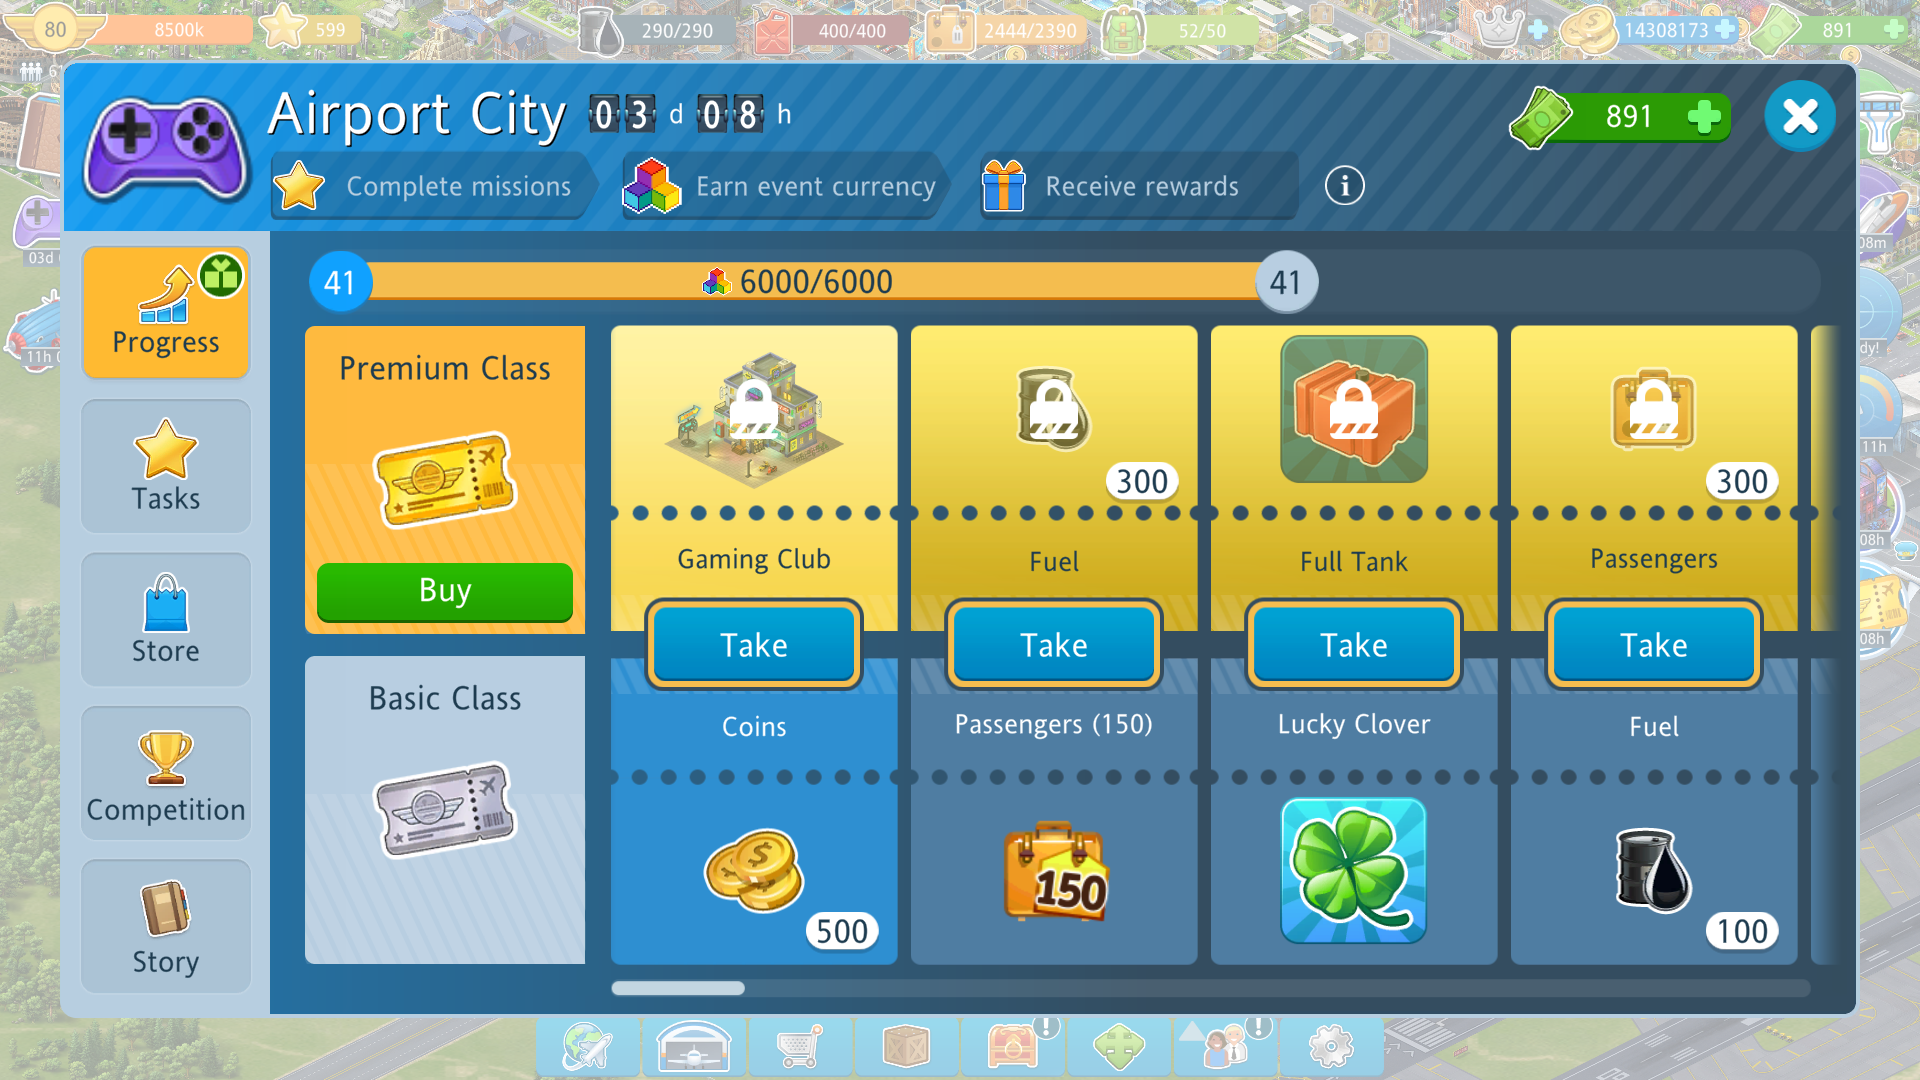 AirportCity_20ghozgdl_success_tasks.png